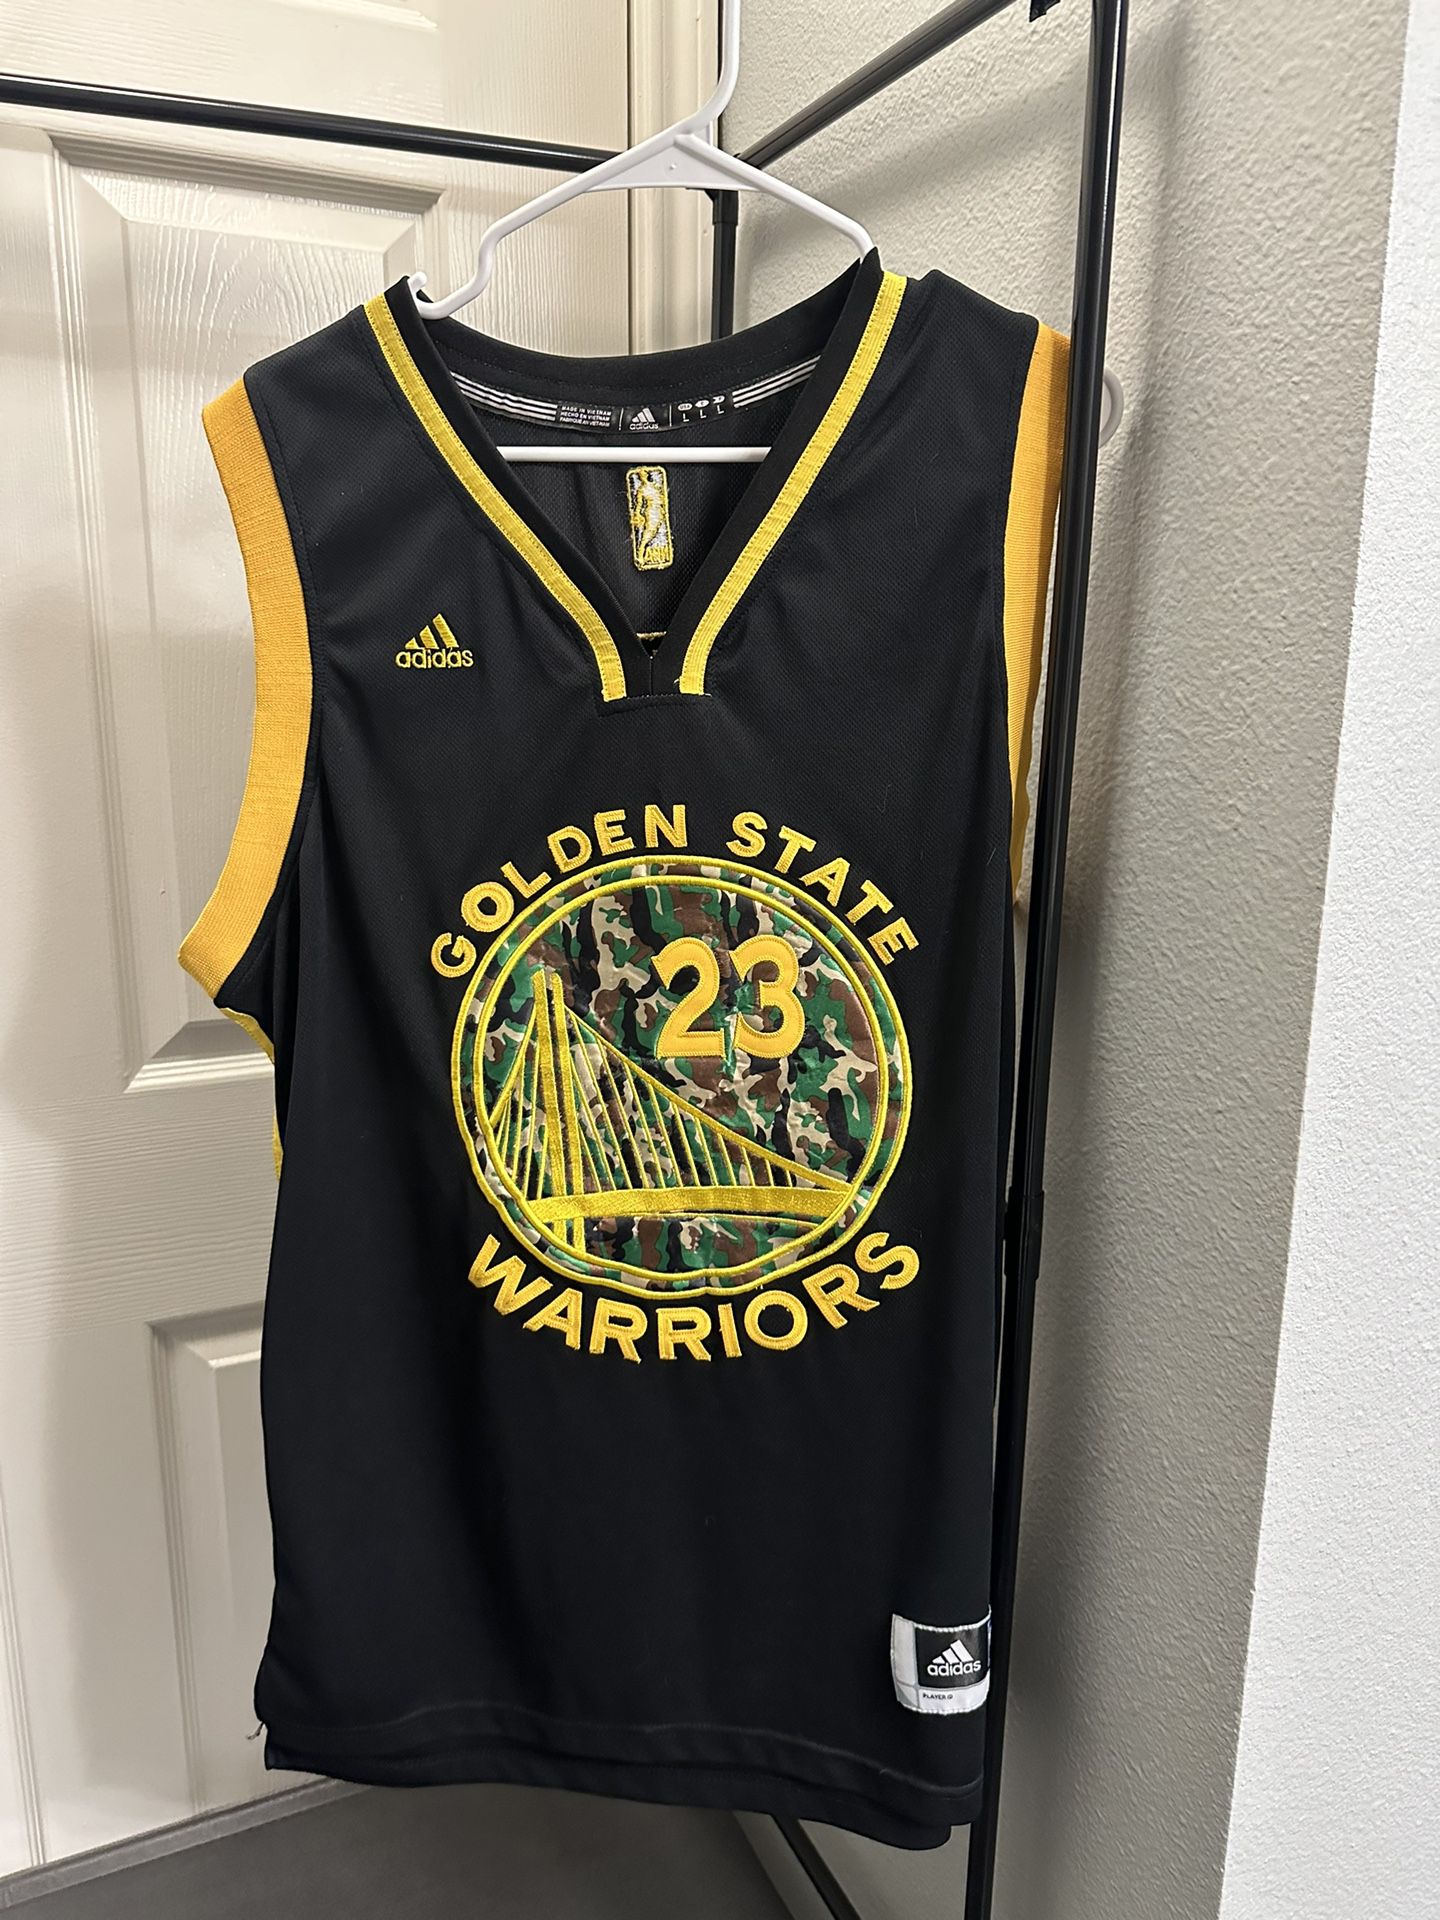 Golden state Jersey